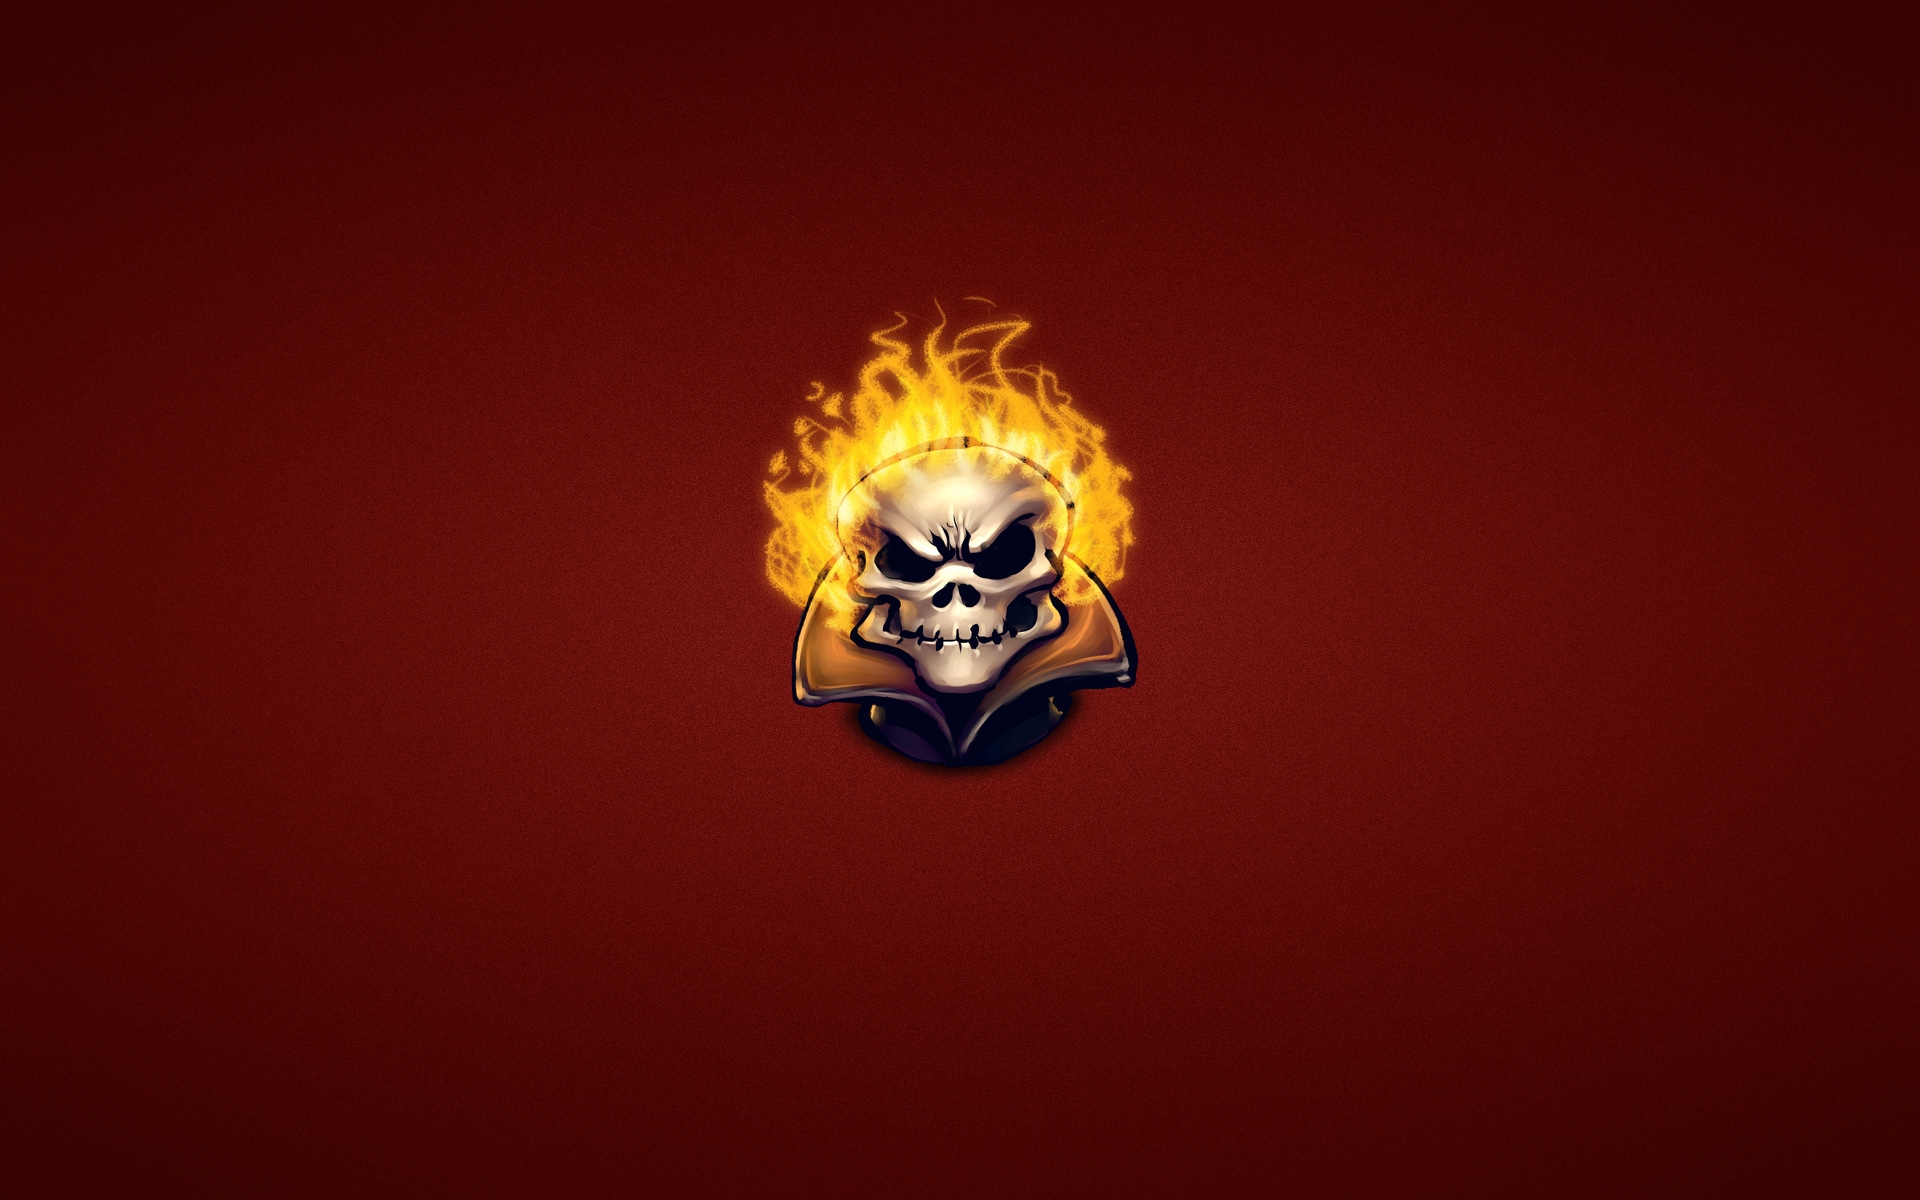 Ghost Rider 2 Wallpapers 1366x768 Wallpaper Ghost Rider Skeleton